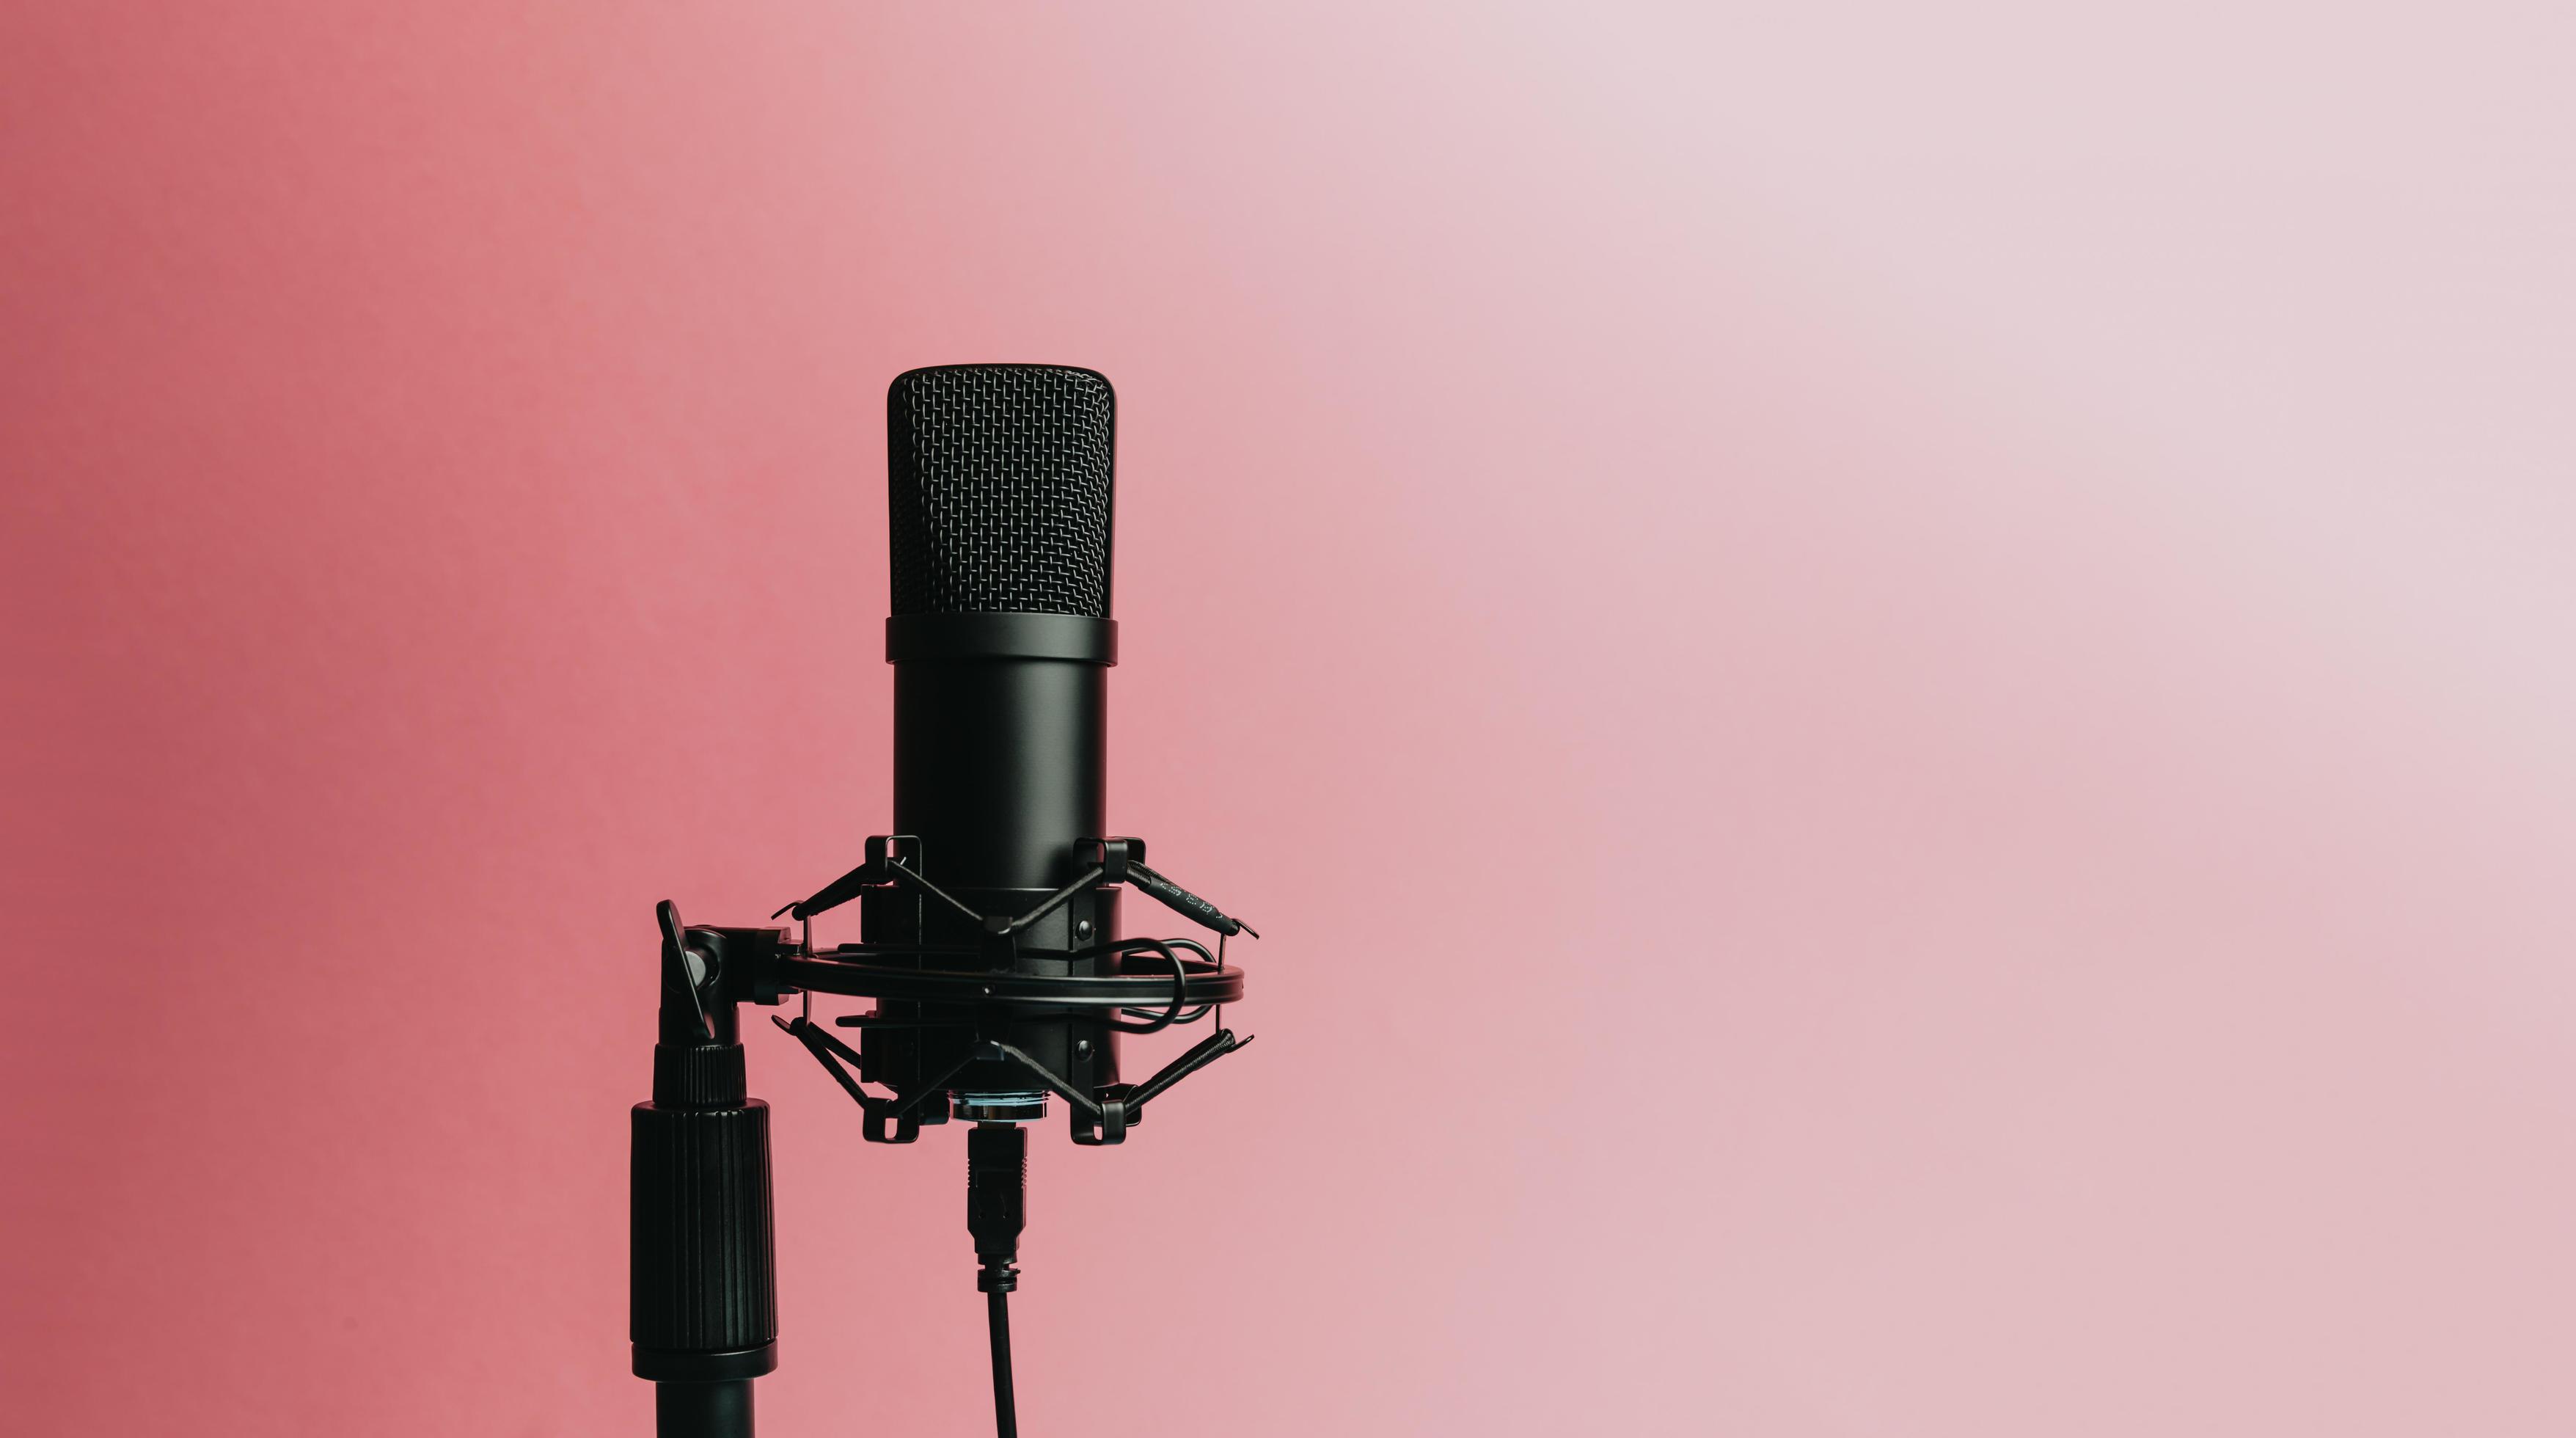 Download Streaming Microphone Over An Pastel Pink Background 2487987 Stock Photo At Vecteezy